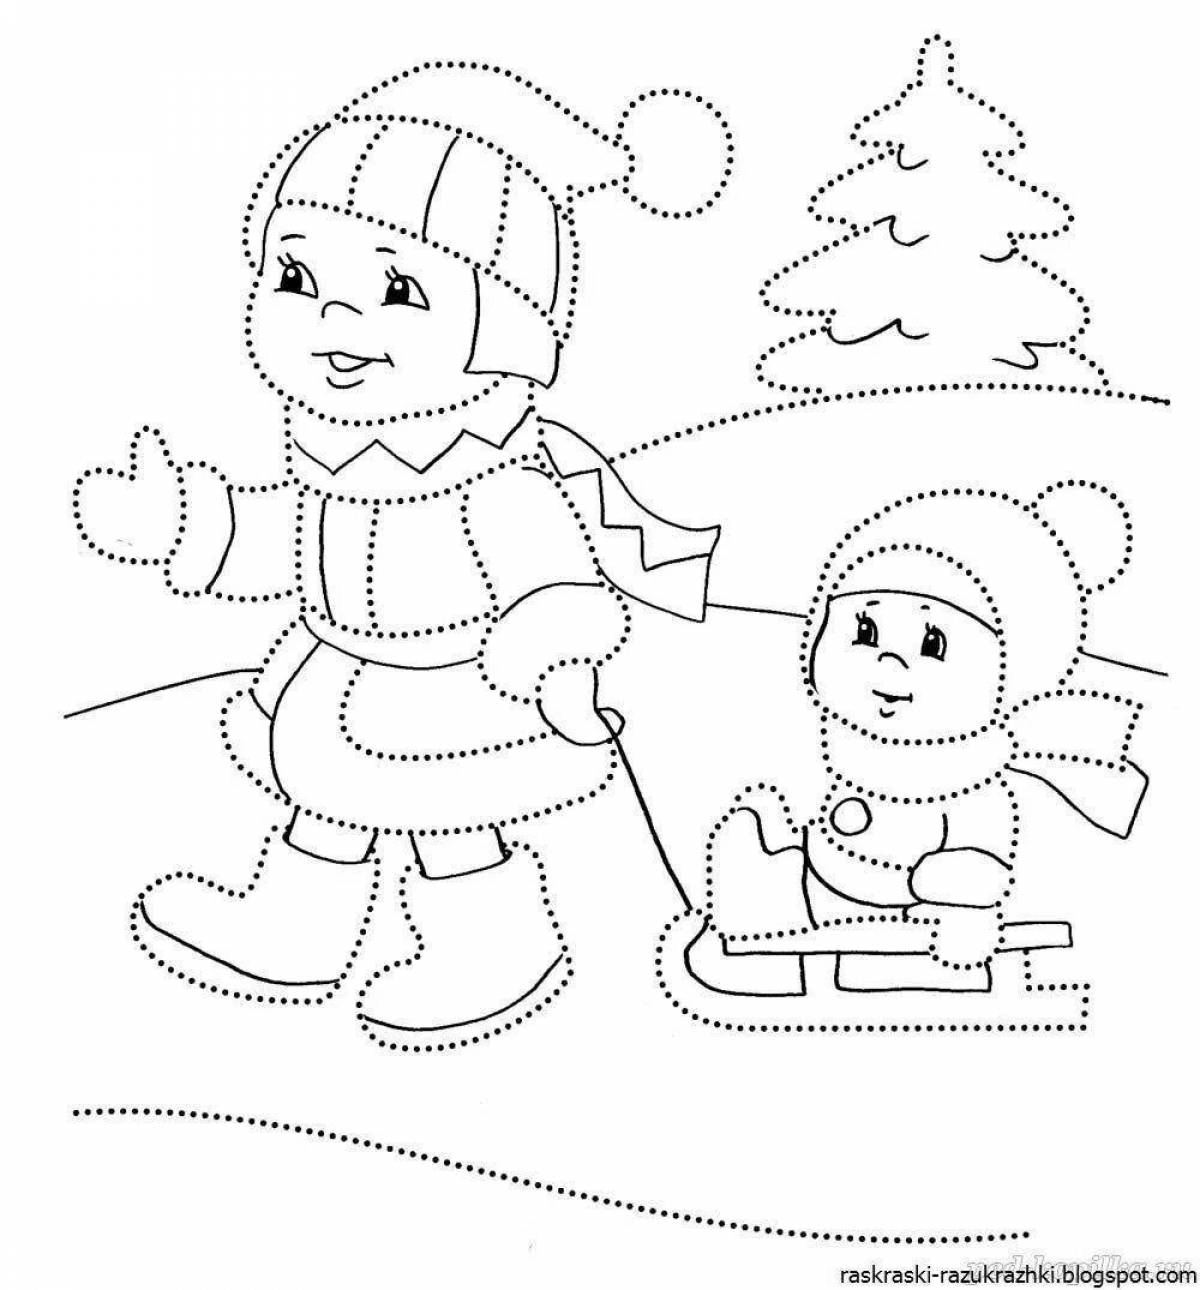 Live winter coloring for children 6-7 years old